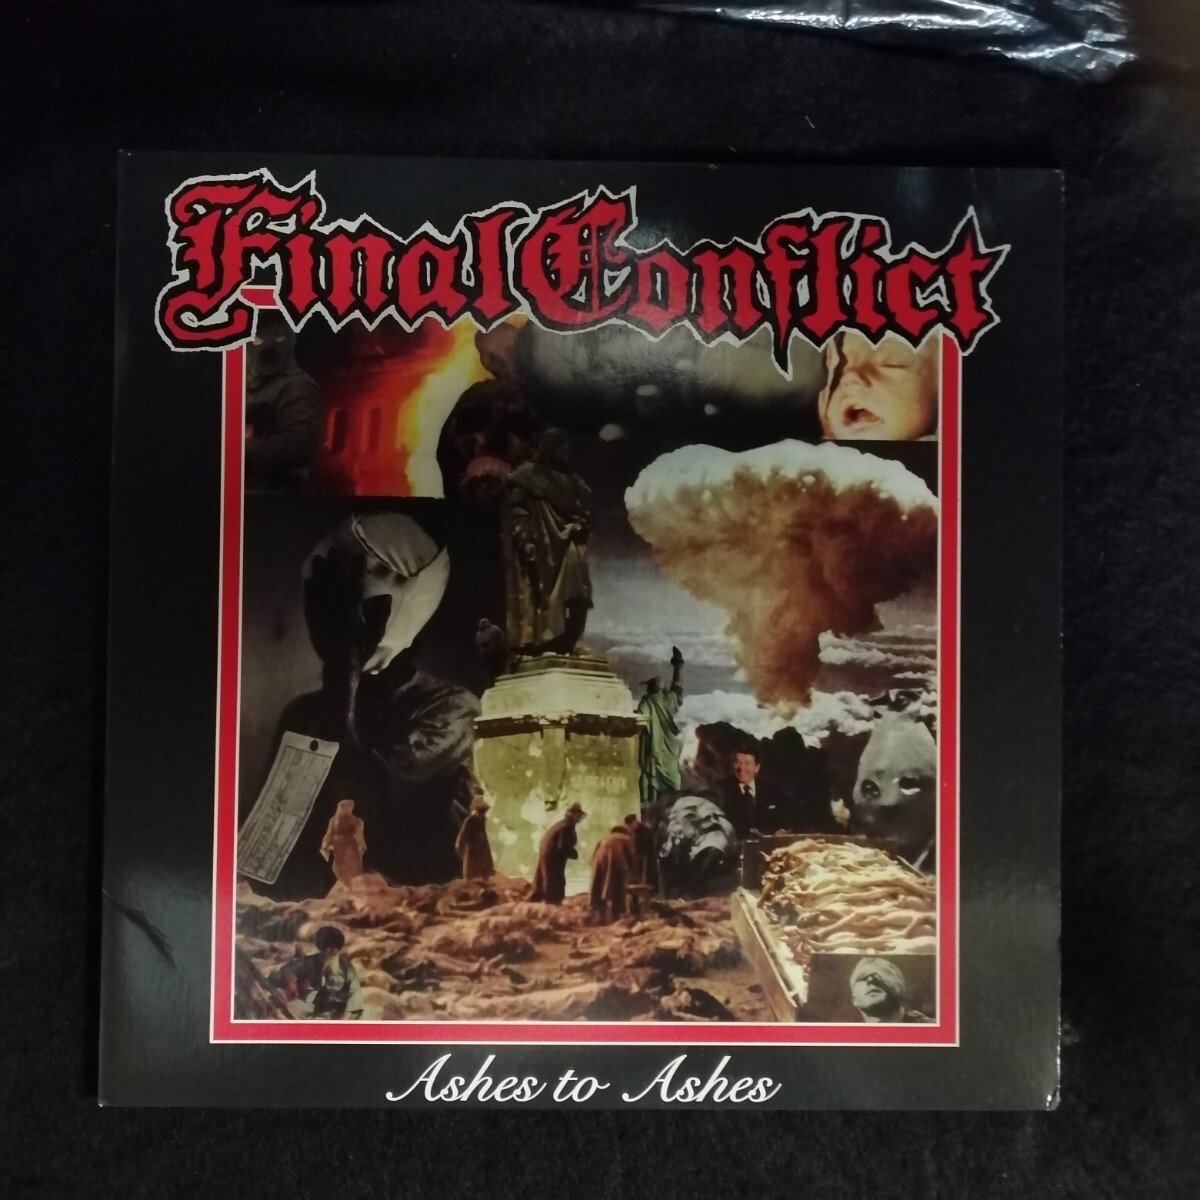 D04 中古LP 中古レコード　FINAL CONFLICT ashes to ashes FLY 8　US盤　ハードコア　パンク　_画像1